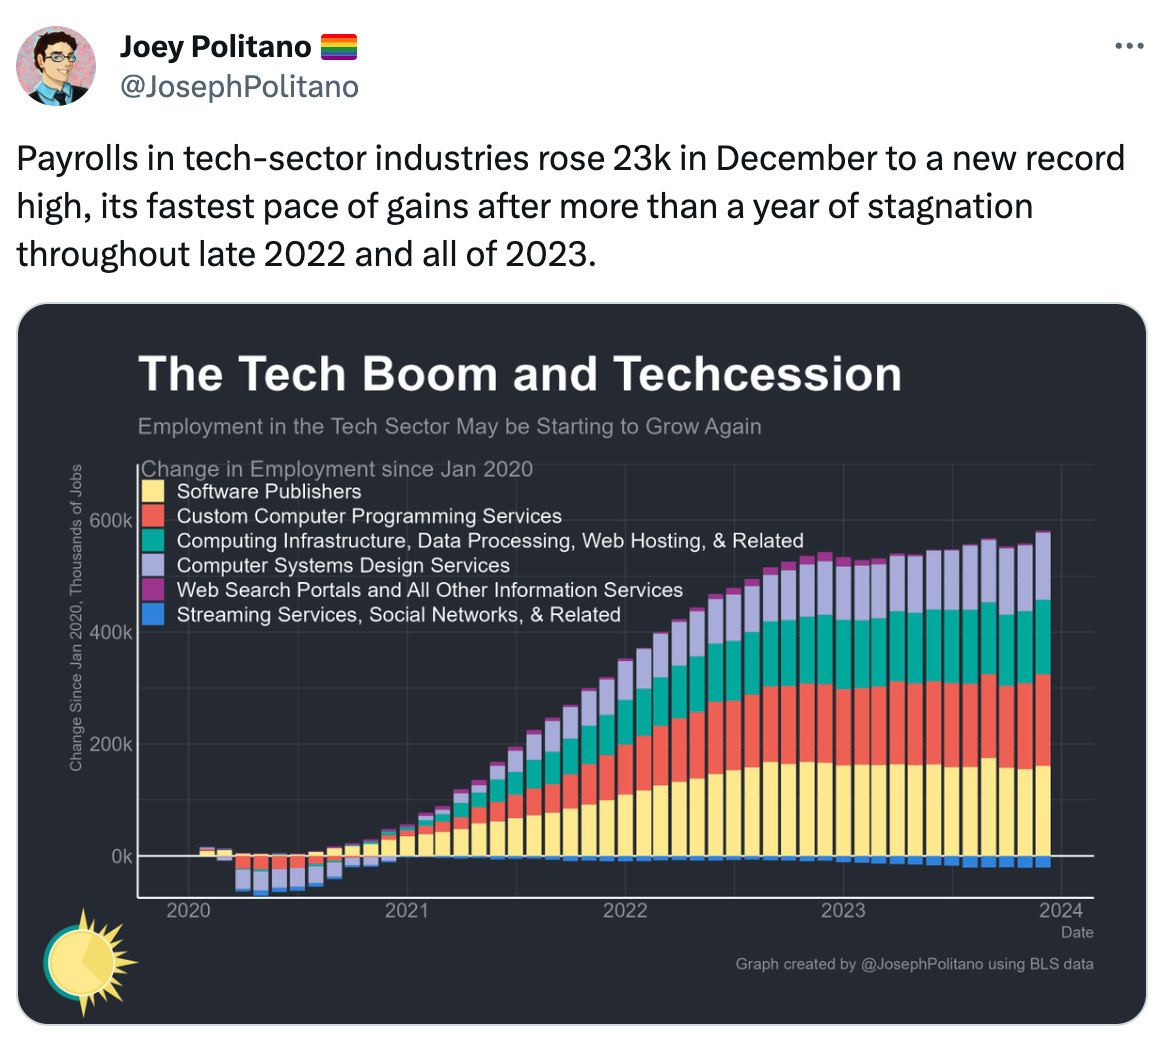  See new posts Conversation Joey Politano 🏳️‍🌈 @JosephPolitano Payrolls in tech-sector industries rose 23k in December to a new record high, its fastest pace of gains after more than a year of stagnation throughout late 2022 and all of 2023.